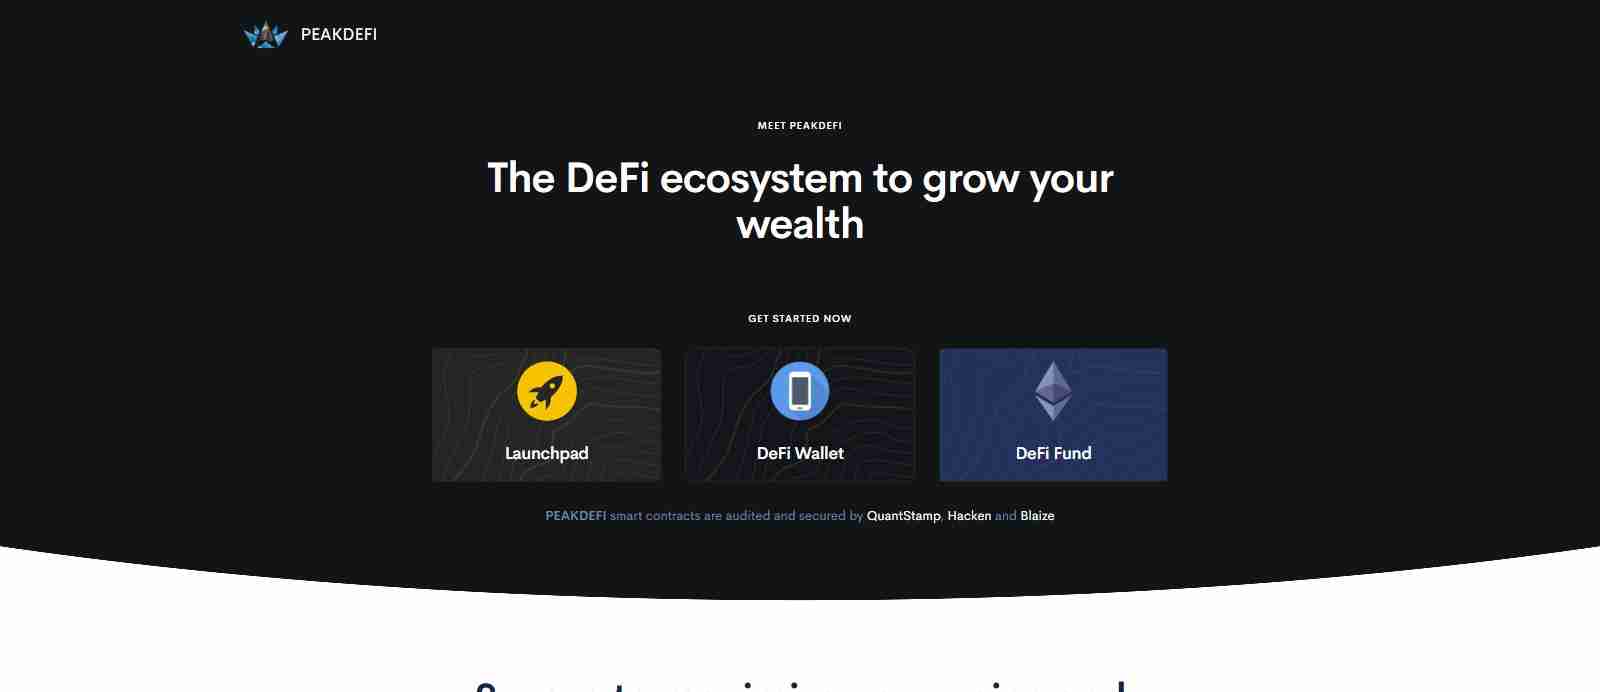 PEAKDEFI Airdrop Review: The DeFi Ecosystem to Grow your Wealth